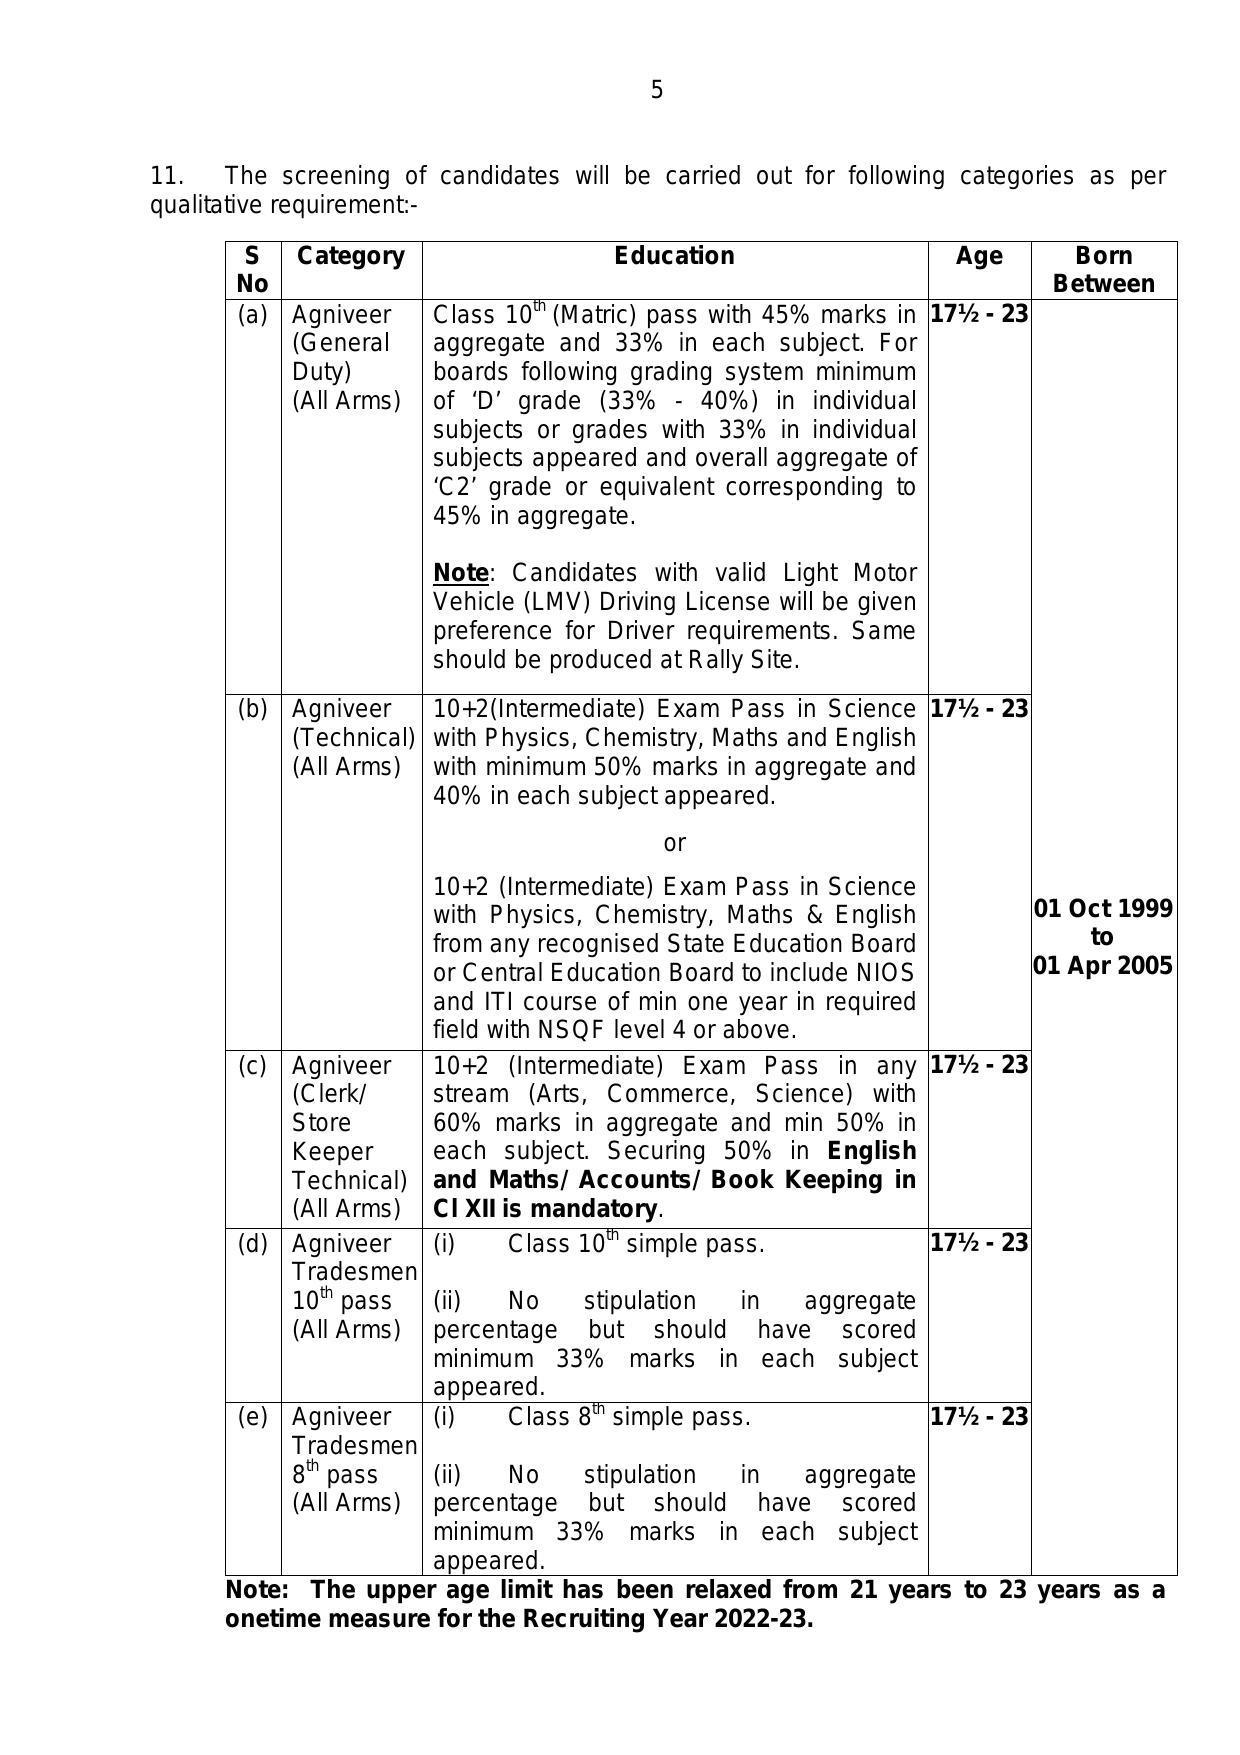 The Indian Army Invites Application for Agniveer Recruitment 2022 - Page 12